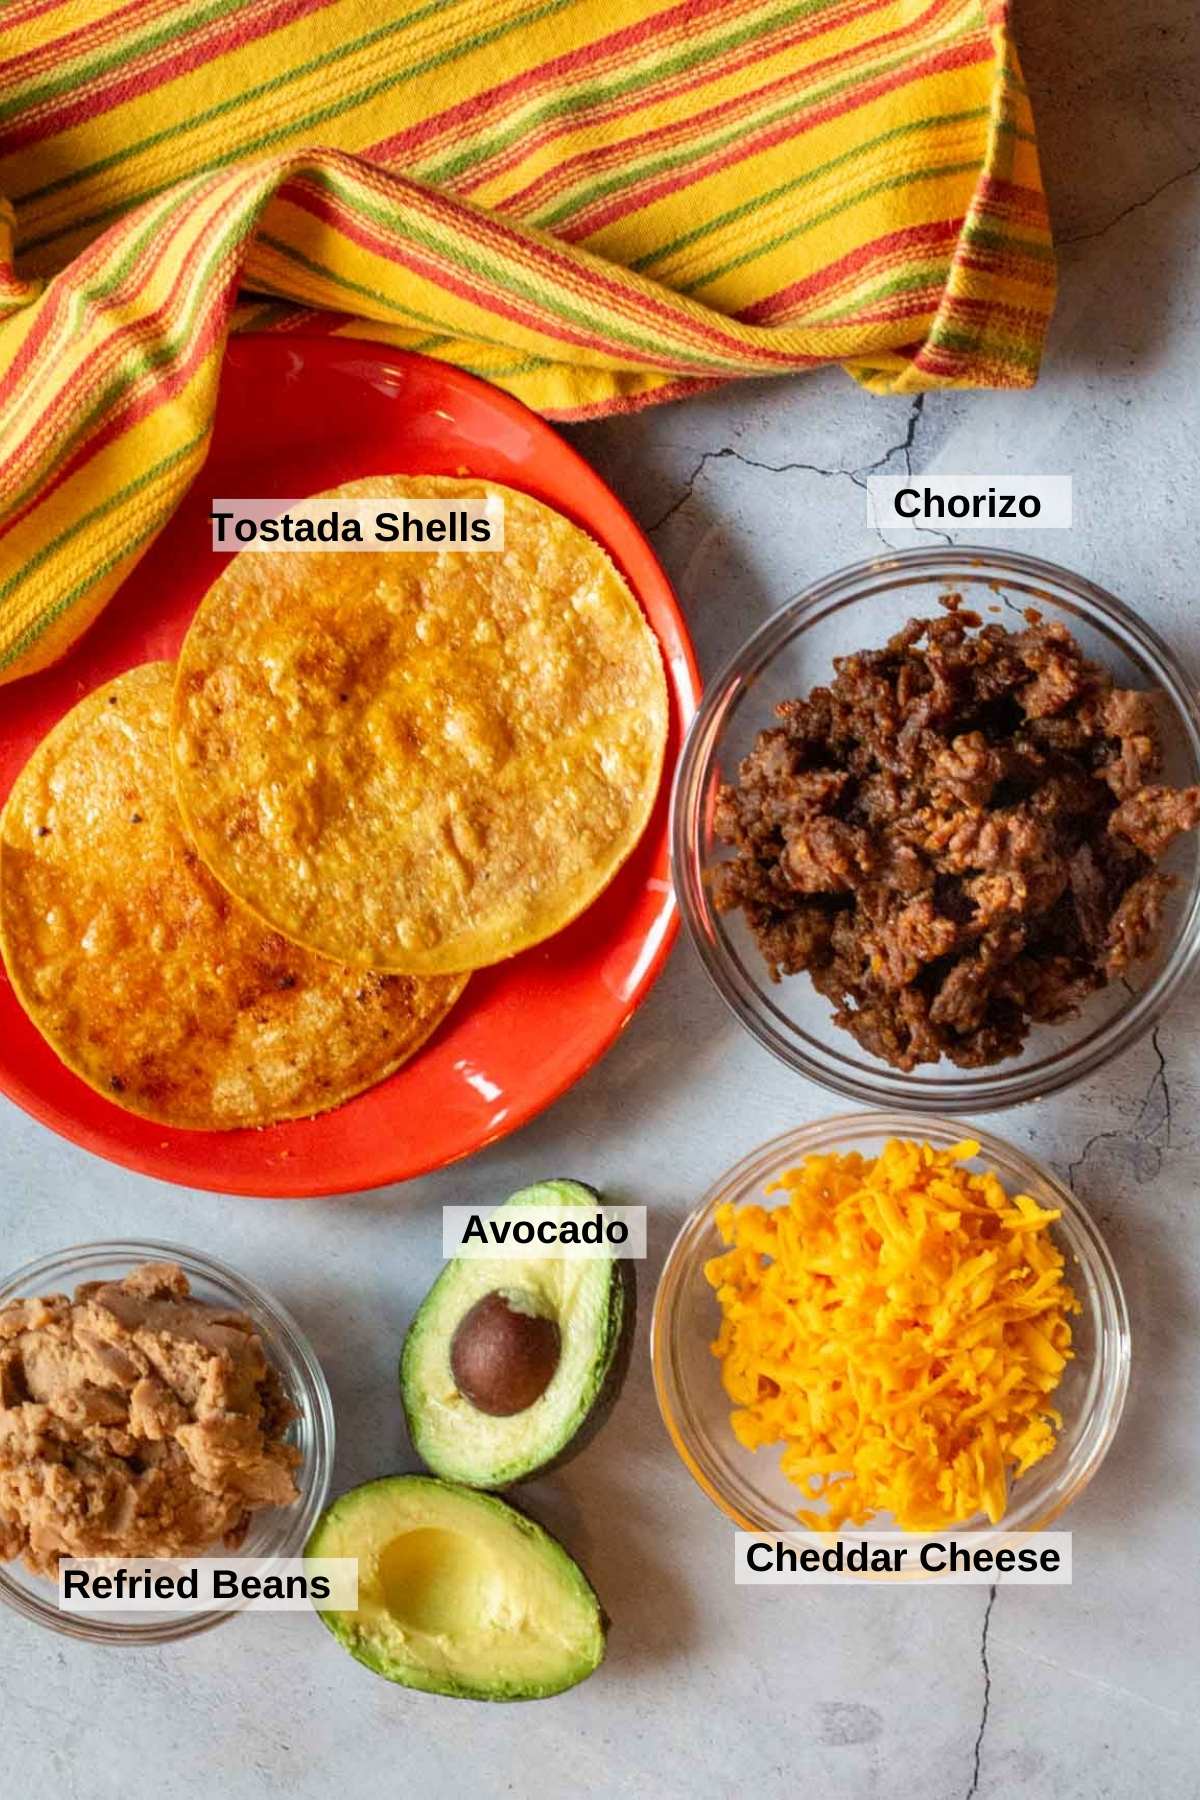 Ingredients To Make The Best Tostada.